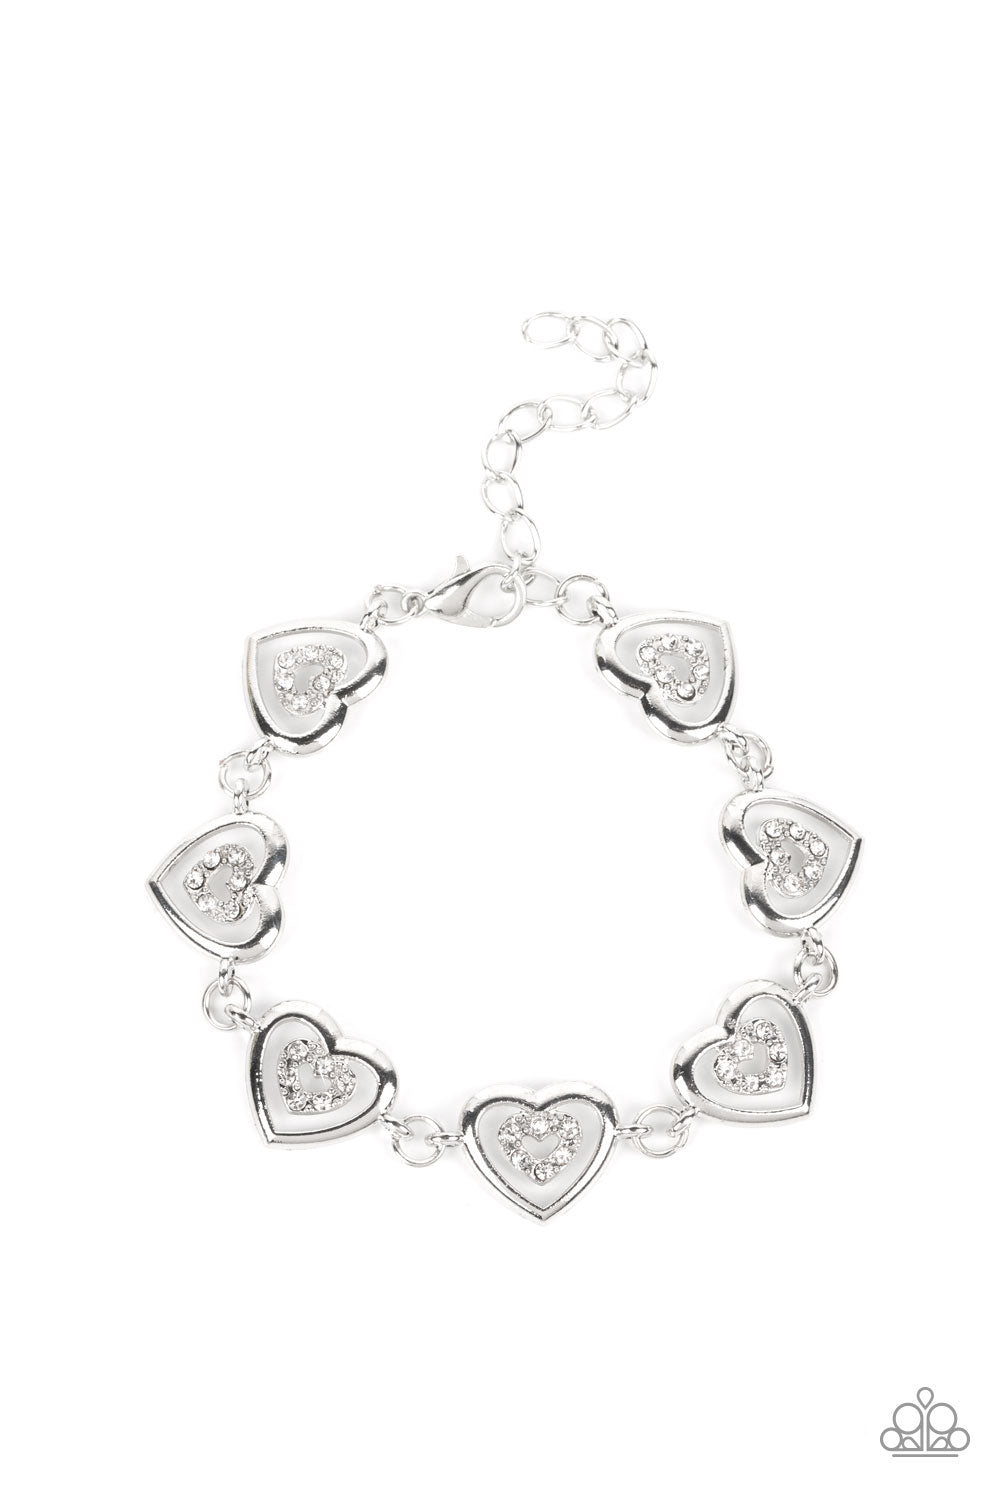 Catching Feelings White Bracelet - Paparazzi Accessories  Dotted with dainty white rhinestones, airy silver heart silhouettes are affixed to the points of larger silver heart frames. The two dimensional heart frames link together around the wrist in a flirtatious finish. Features an adjustable clasp closure.  Sold as one individual bracelet.